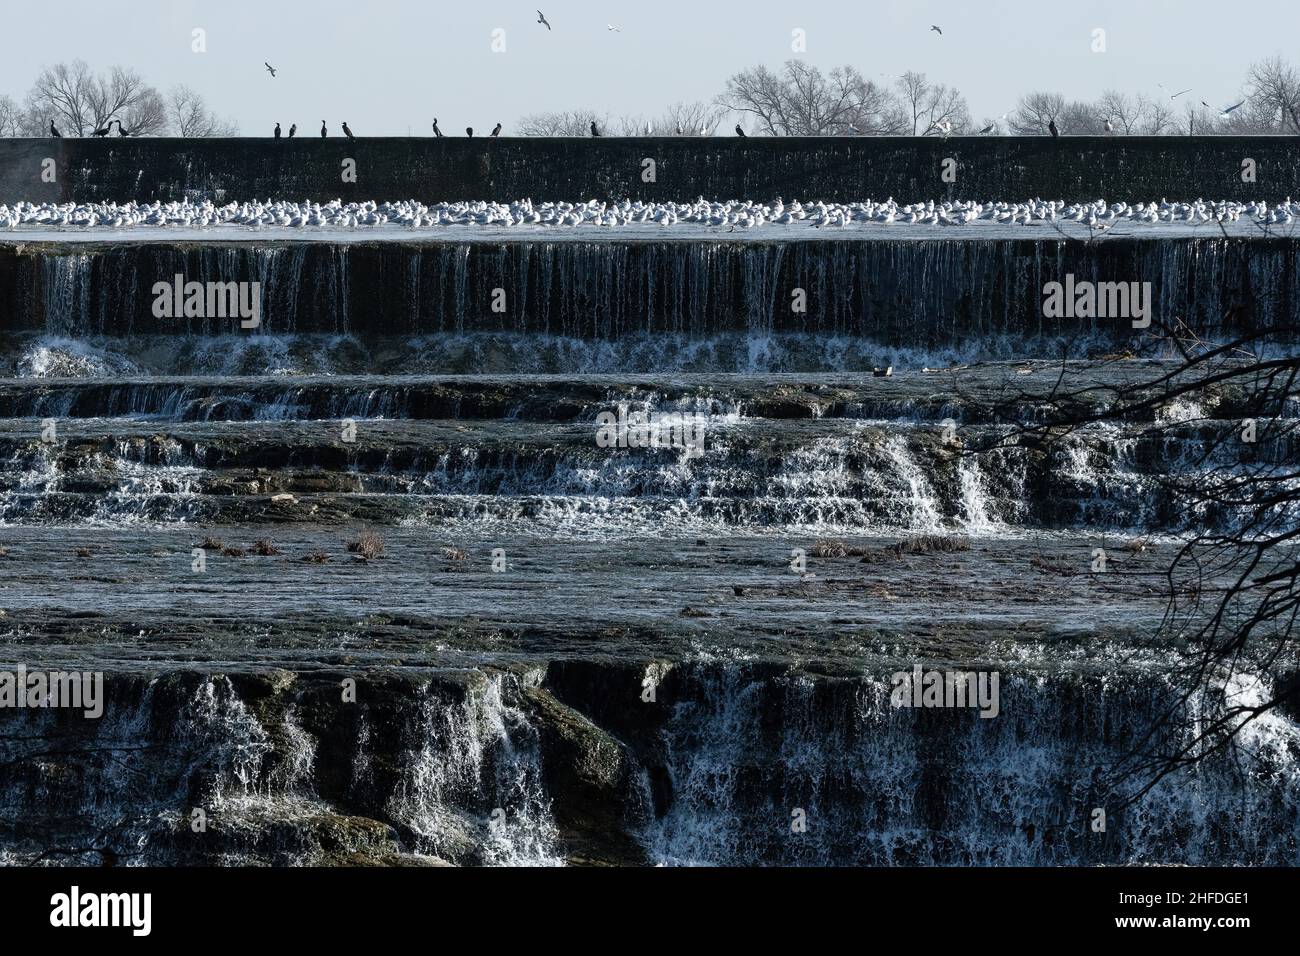 A large flock of Ring-billed Gulls and other birds gathered in the pools of water beneath the spillway of a lake. Stock Photo